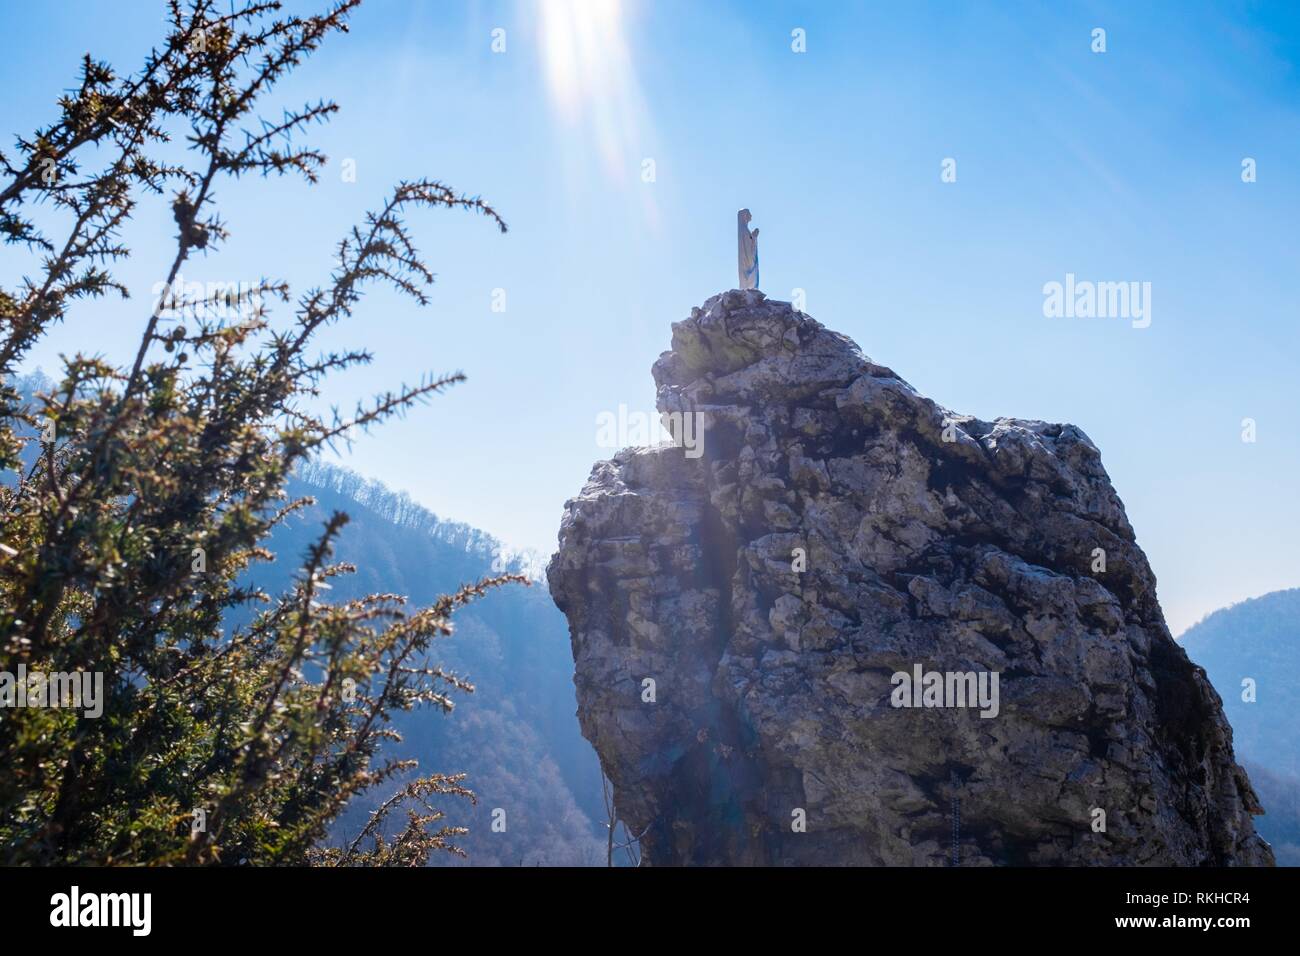 Italy, Lombardy, Varese, statue of the most holy Virgin Mary over a rock, bathed in rays of sun from the sky. Stock Photo